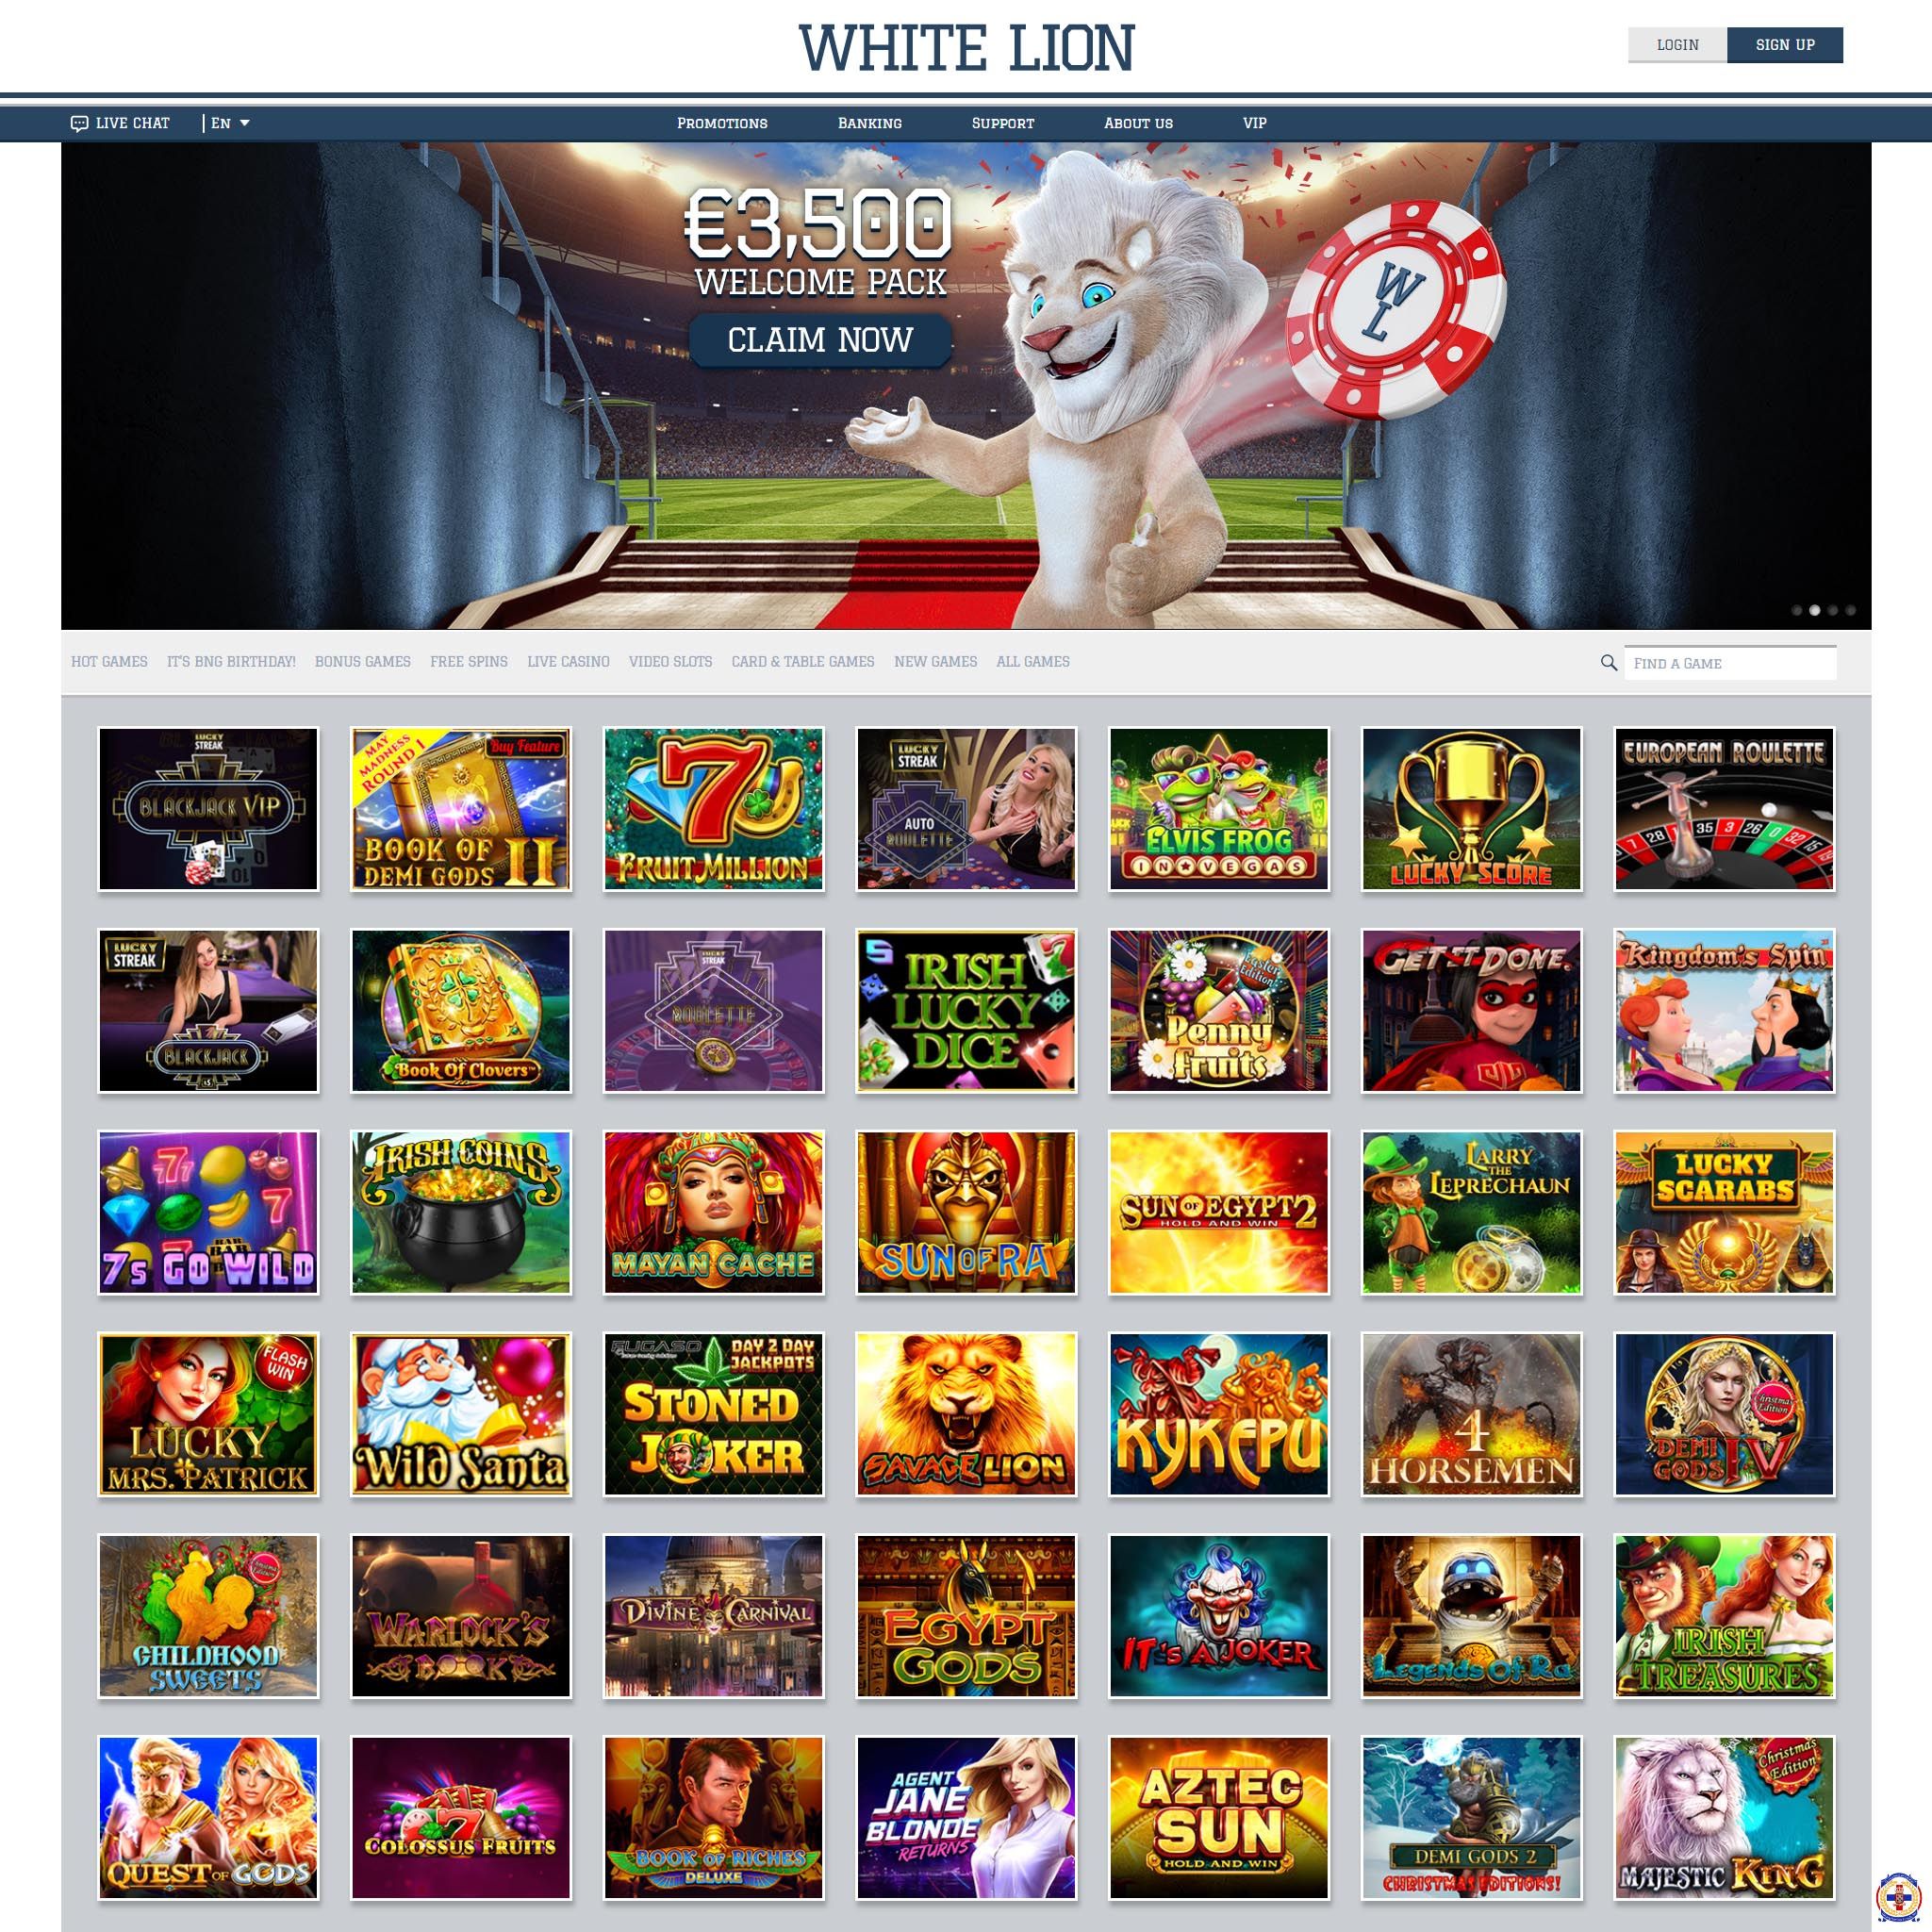 WhiteLion Bets Casino review by Mr. Gamble